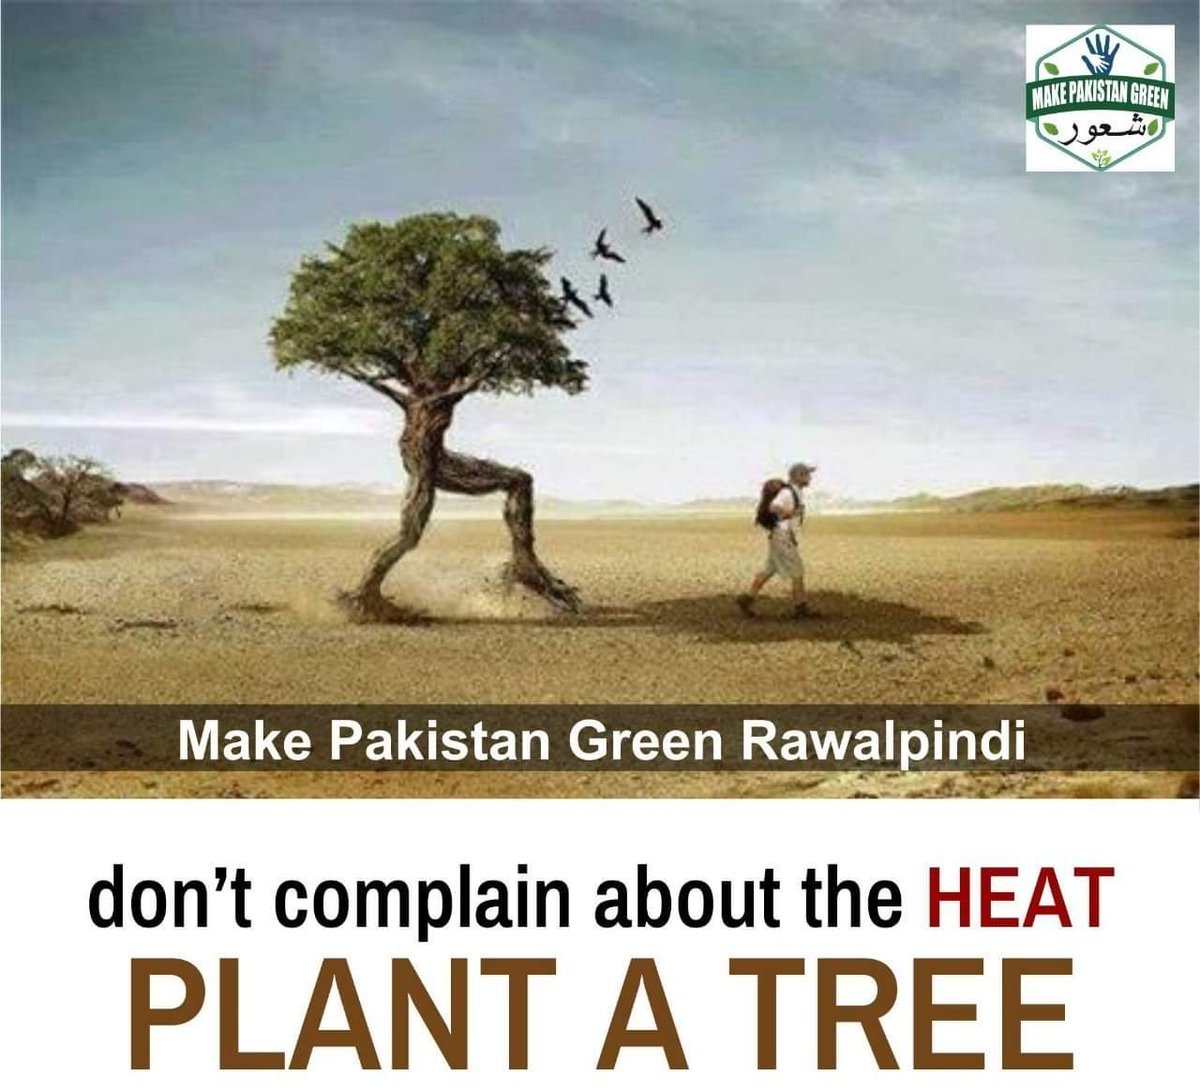 Each part of the tree contributes to climate control, from leaves to roots.

'THE GREATEST FINE ART OF THE FUTURE WILL BE MAKING OF A COMFORTABLE LIVING FROM A SMALL PIECE OF LAND WITH GREENERY.'
#MakePakistanGreen #TeamRawalpindi